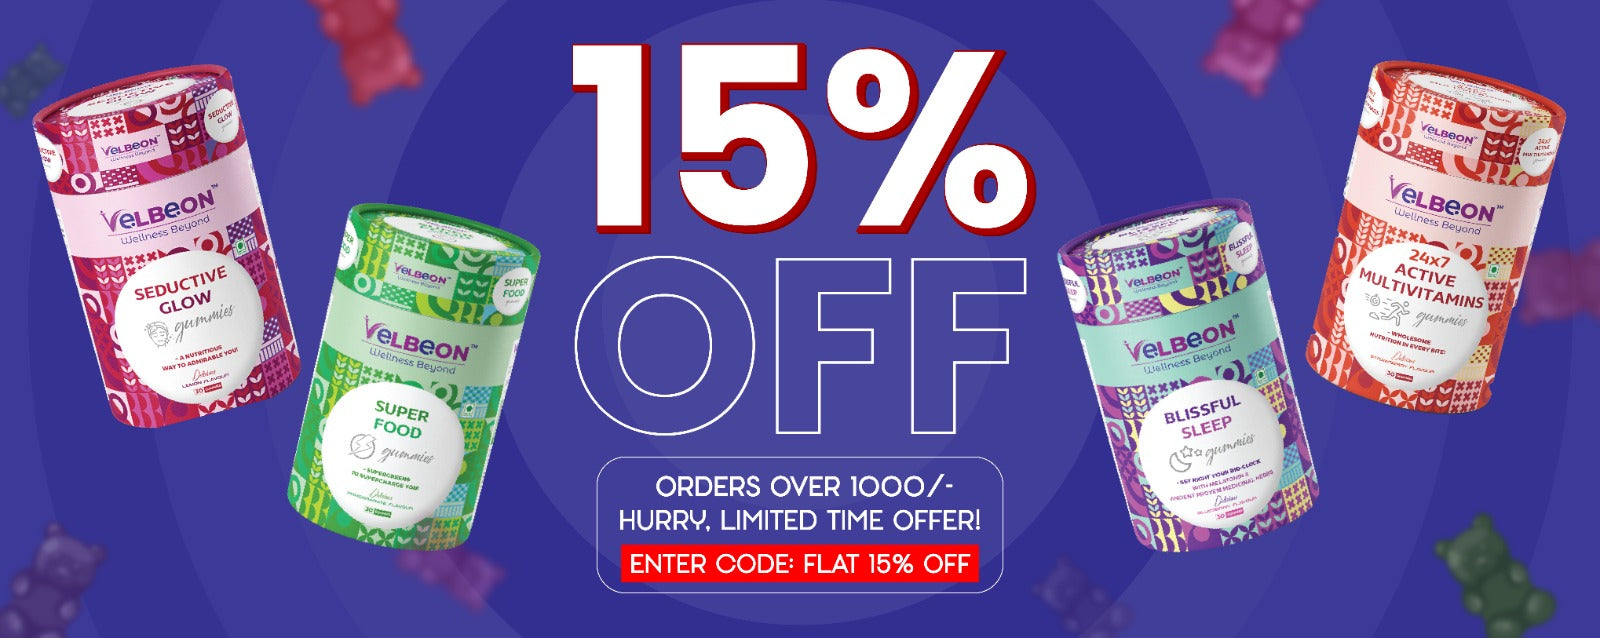 15 % OFF ORDERS OVER 1000/- HURRY, LIMITED TIME OFFER!